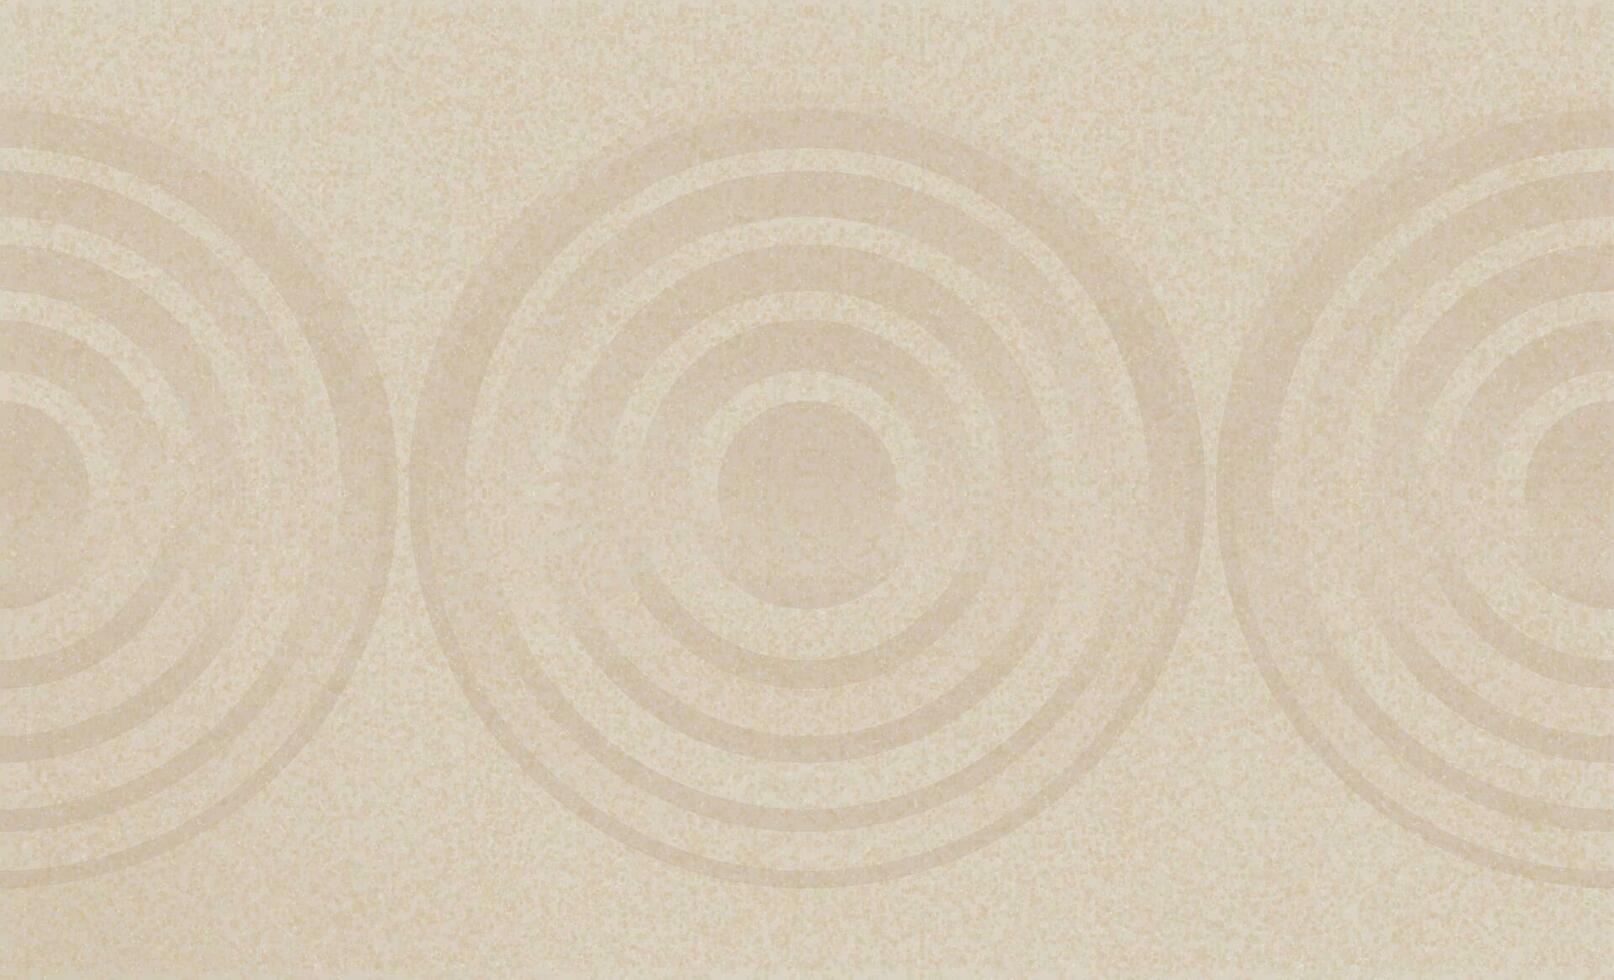 Japanese Zen Garden with concentric circles and parallel lines on brown sand surface background,Sand texture with simple spiritual patterns,Harmony,Meditation,Zen like concept vector